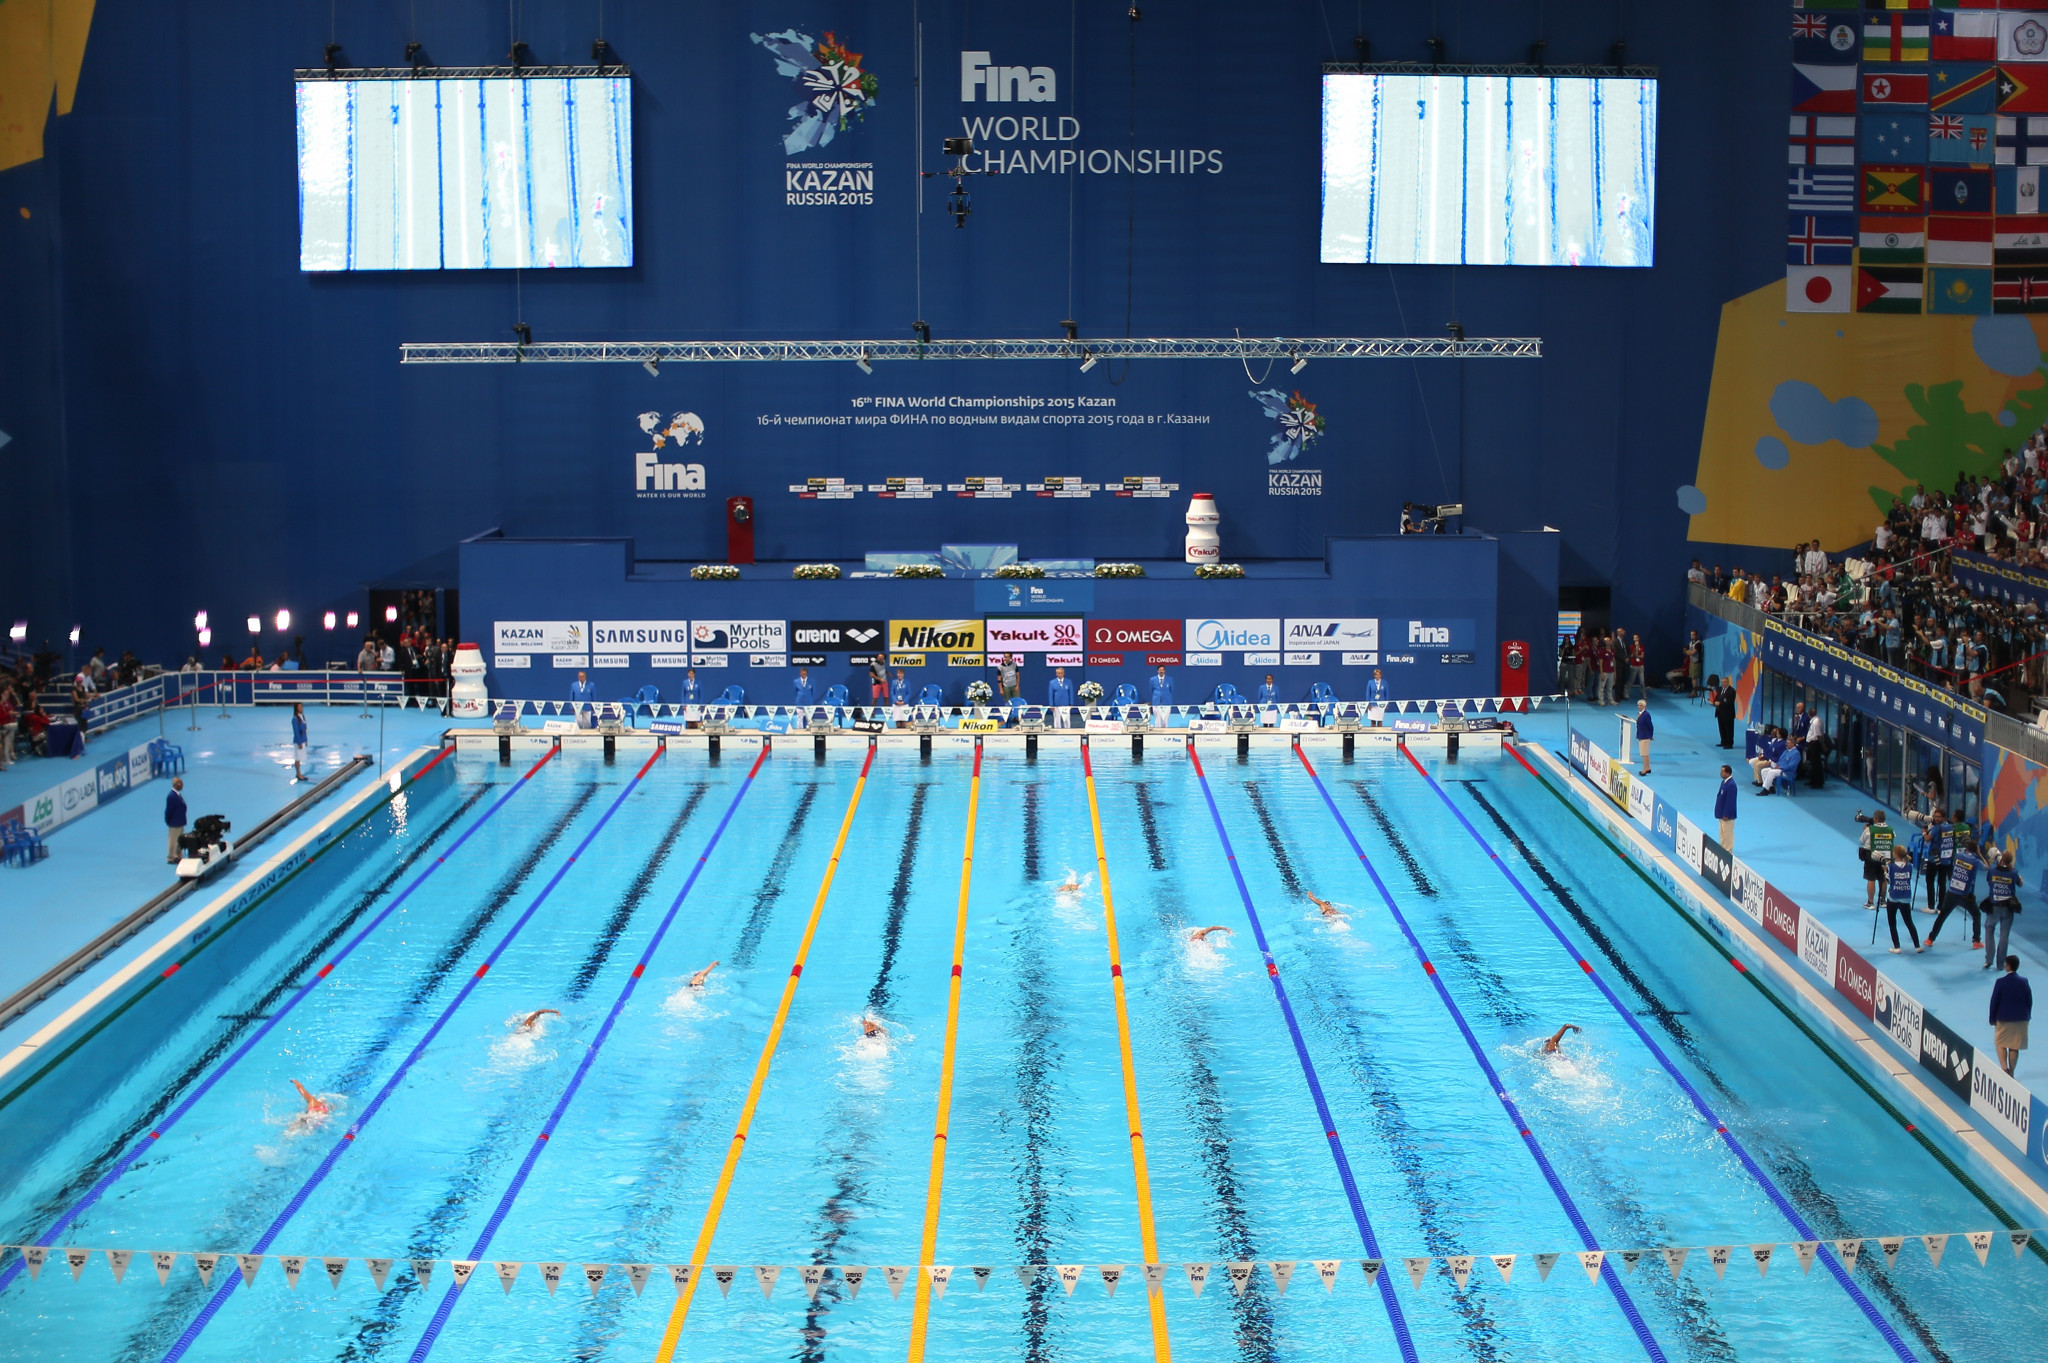 Kazan hosted the 2015 FINA World Championships ©Getty Images